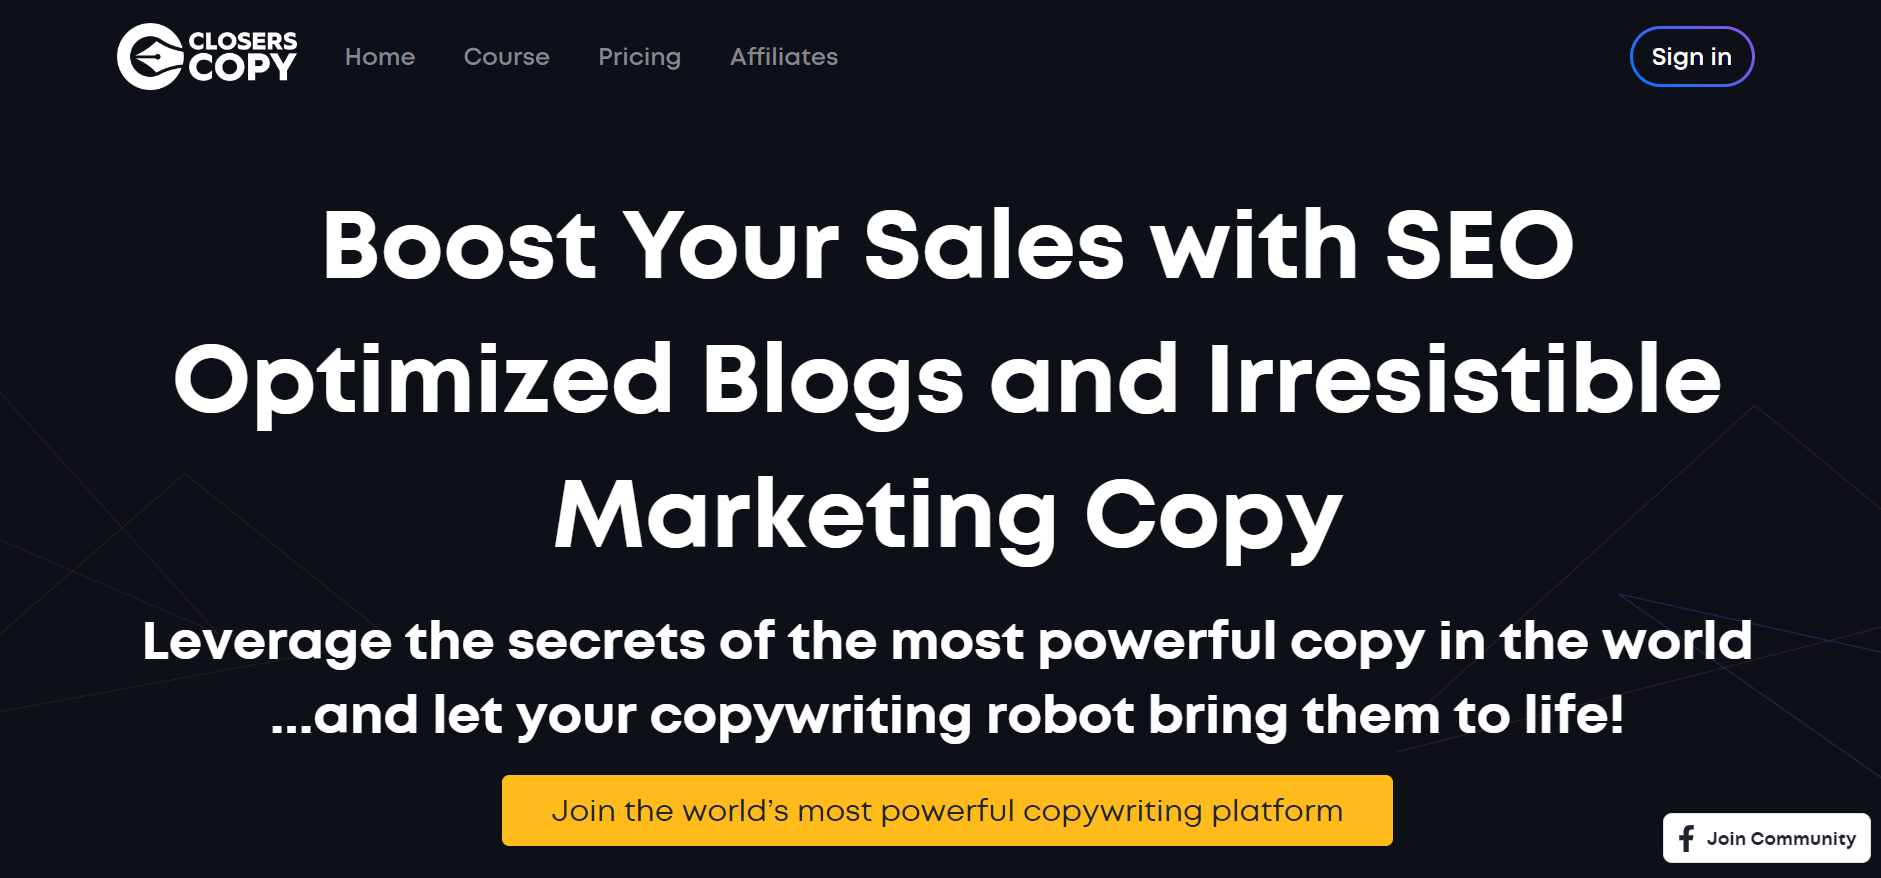 ClosersCopy Landing Page - "Boost Your Sales with SEO Optimized Blogs and Irresistible Marketing Copy" 